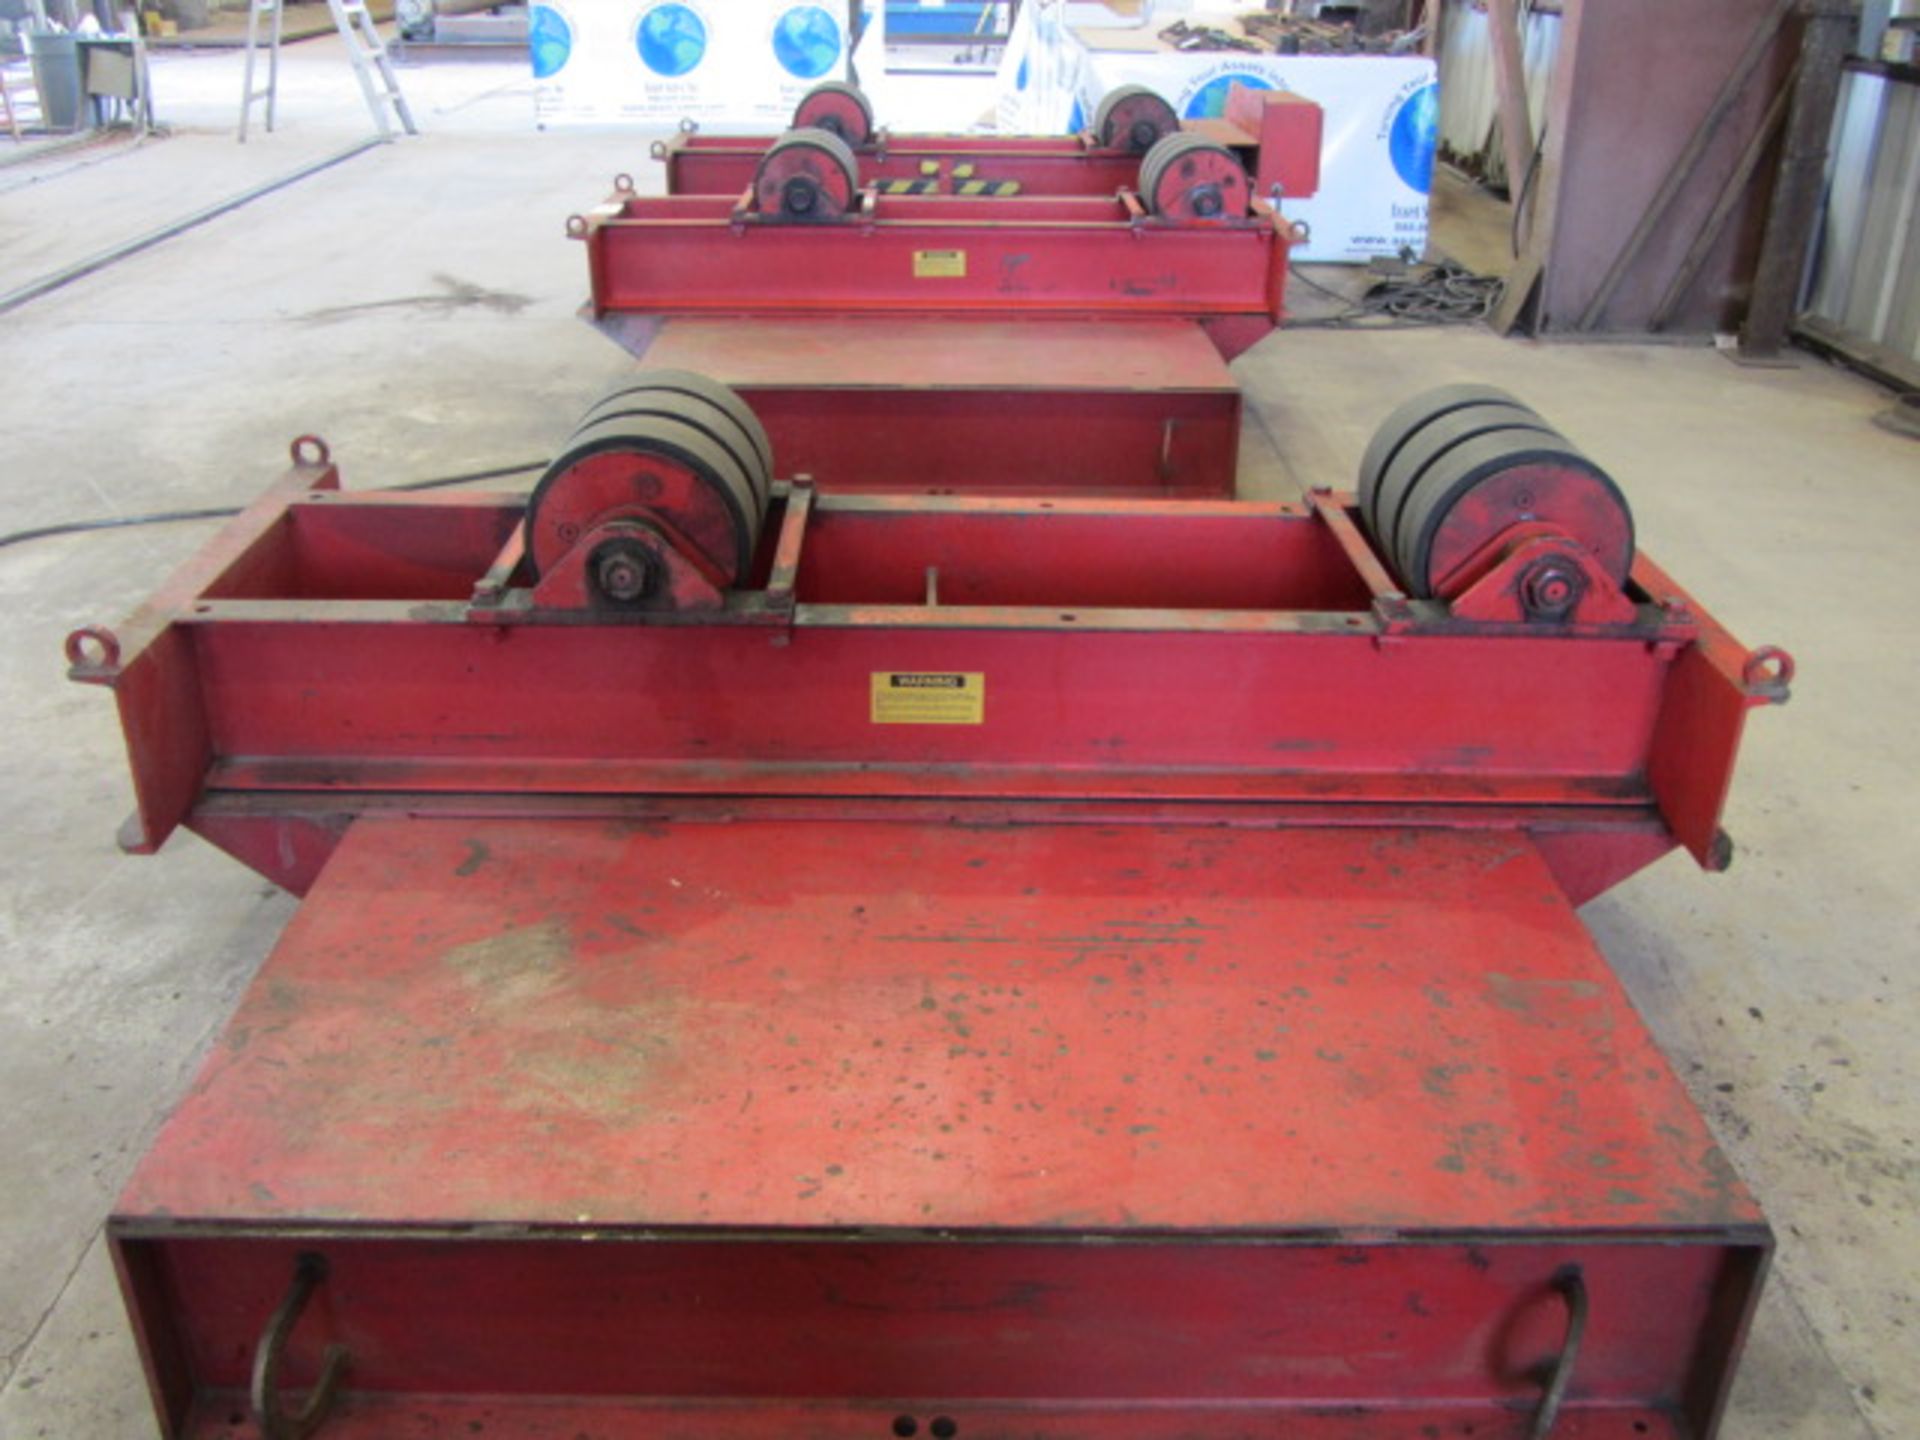 Weldwire Model WWRD-20, (1) Drive (2) Idler Rolls with Capacity to 30 Tons, Adjustable Carts & - Image 4 of 7